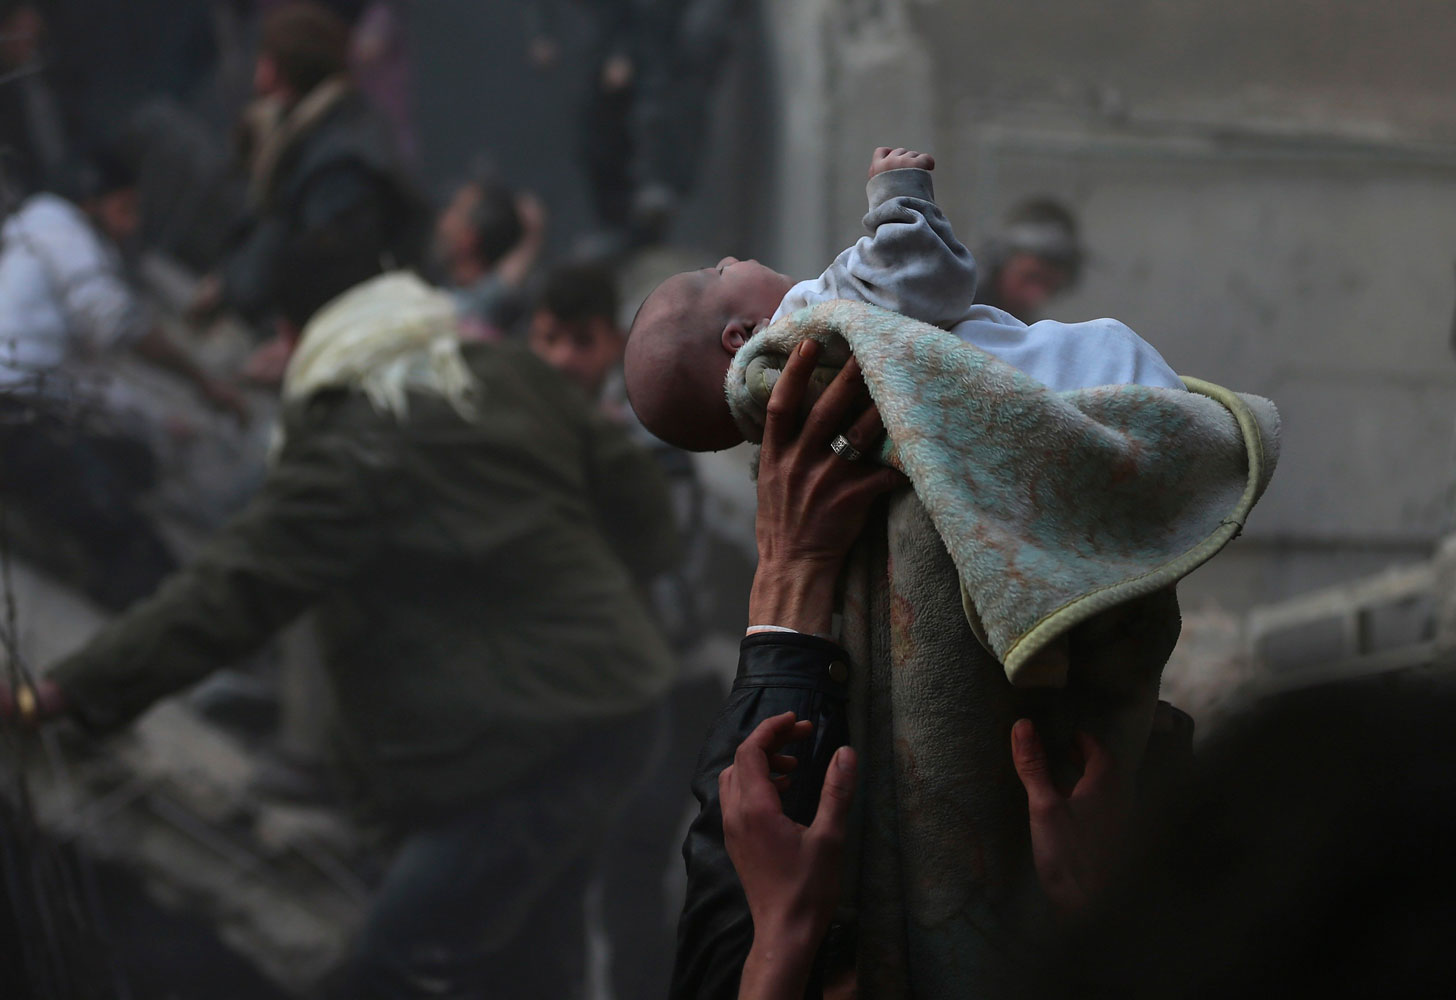 Men hold up a baby saved from what activists say was an airstrike by forces loyal to Syrian President Bashar al-Assad in Damascus on January 7, 2014.